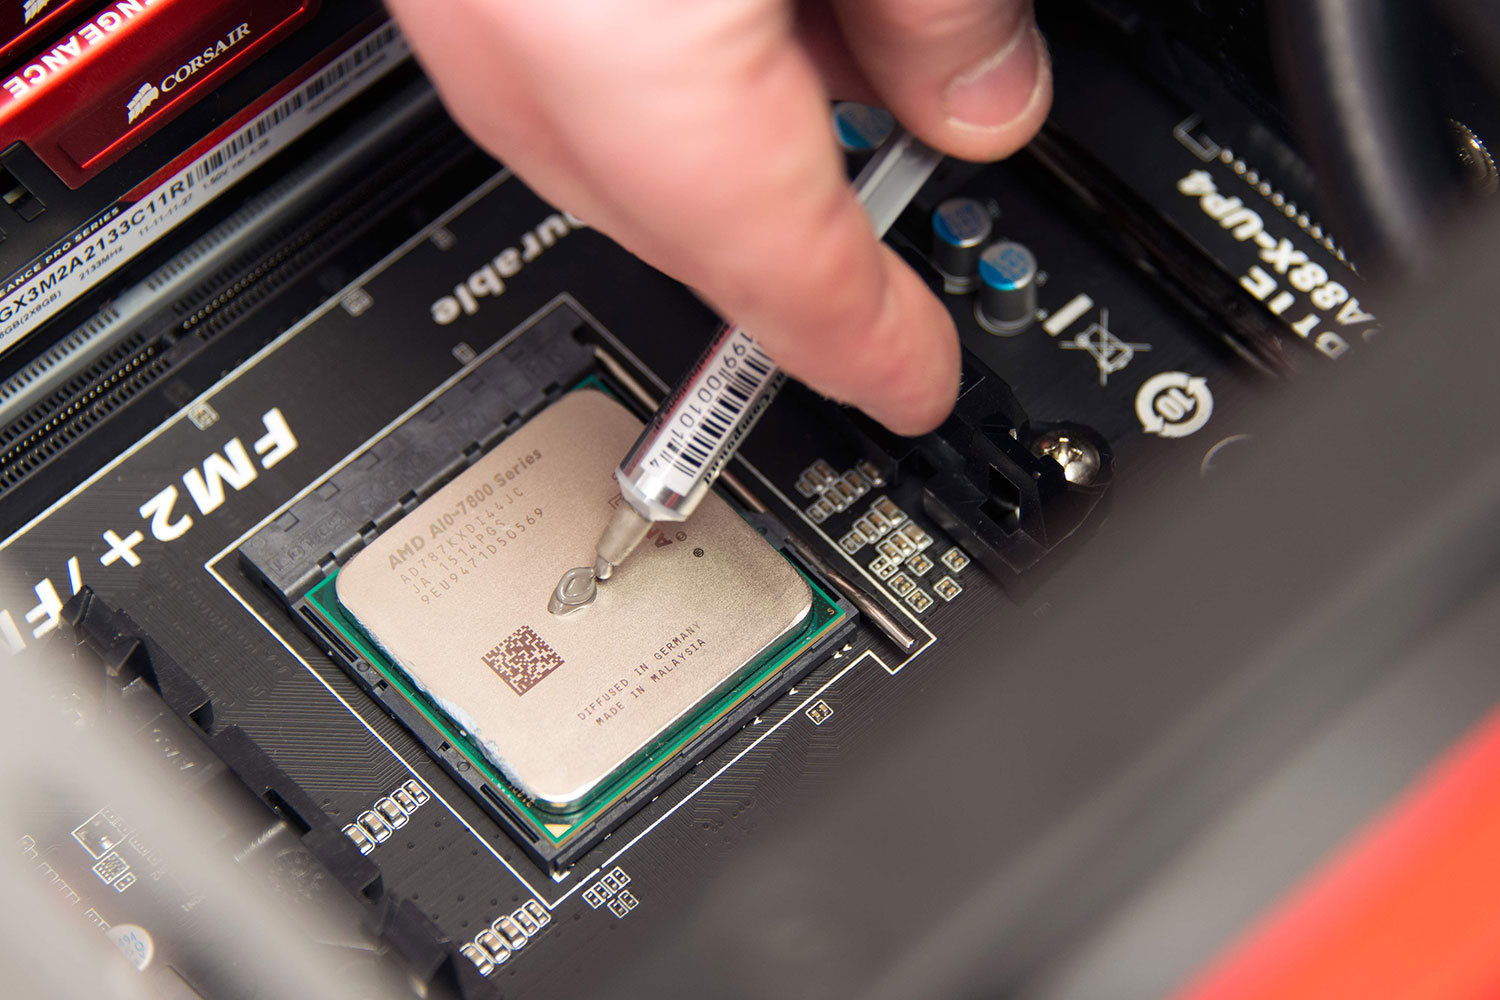 This Is Why You Should Use More Thermal Paste for Your CPU!